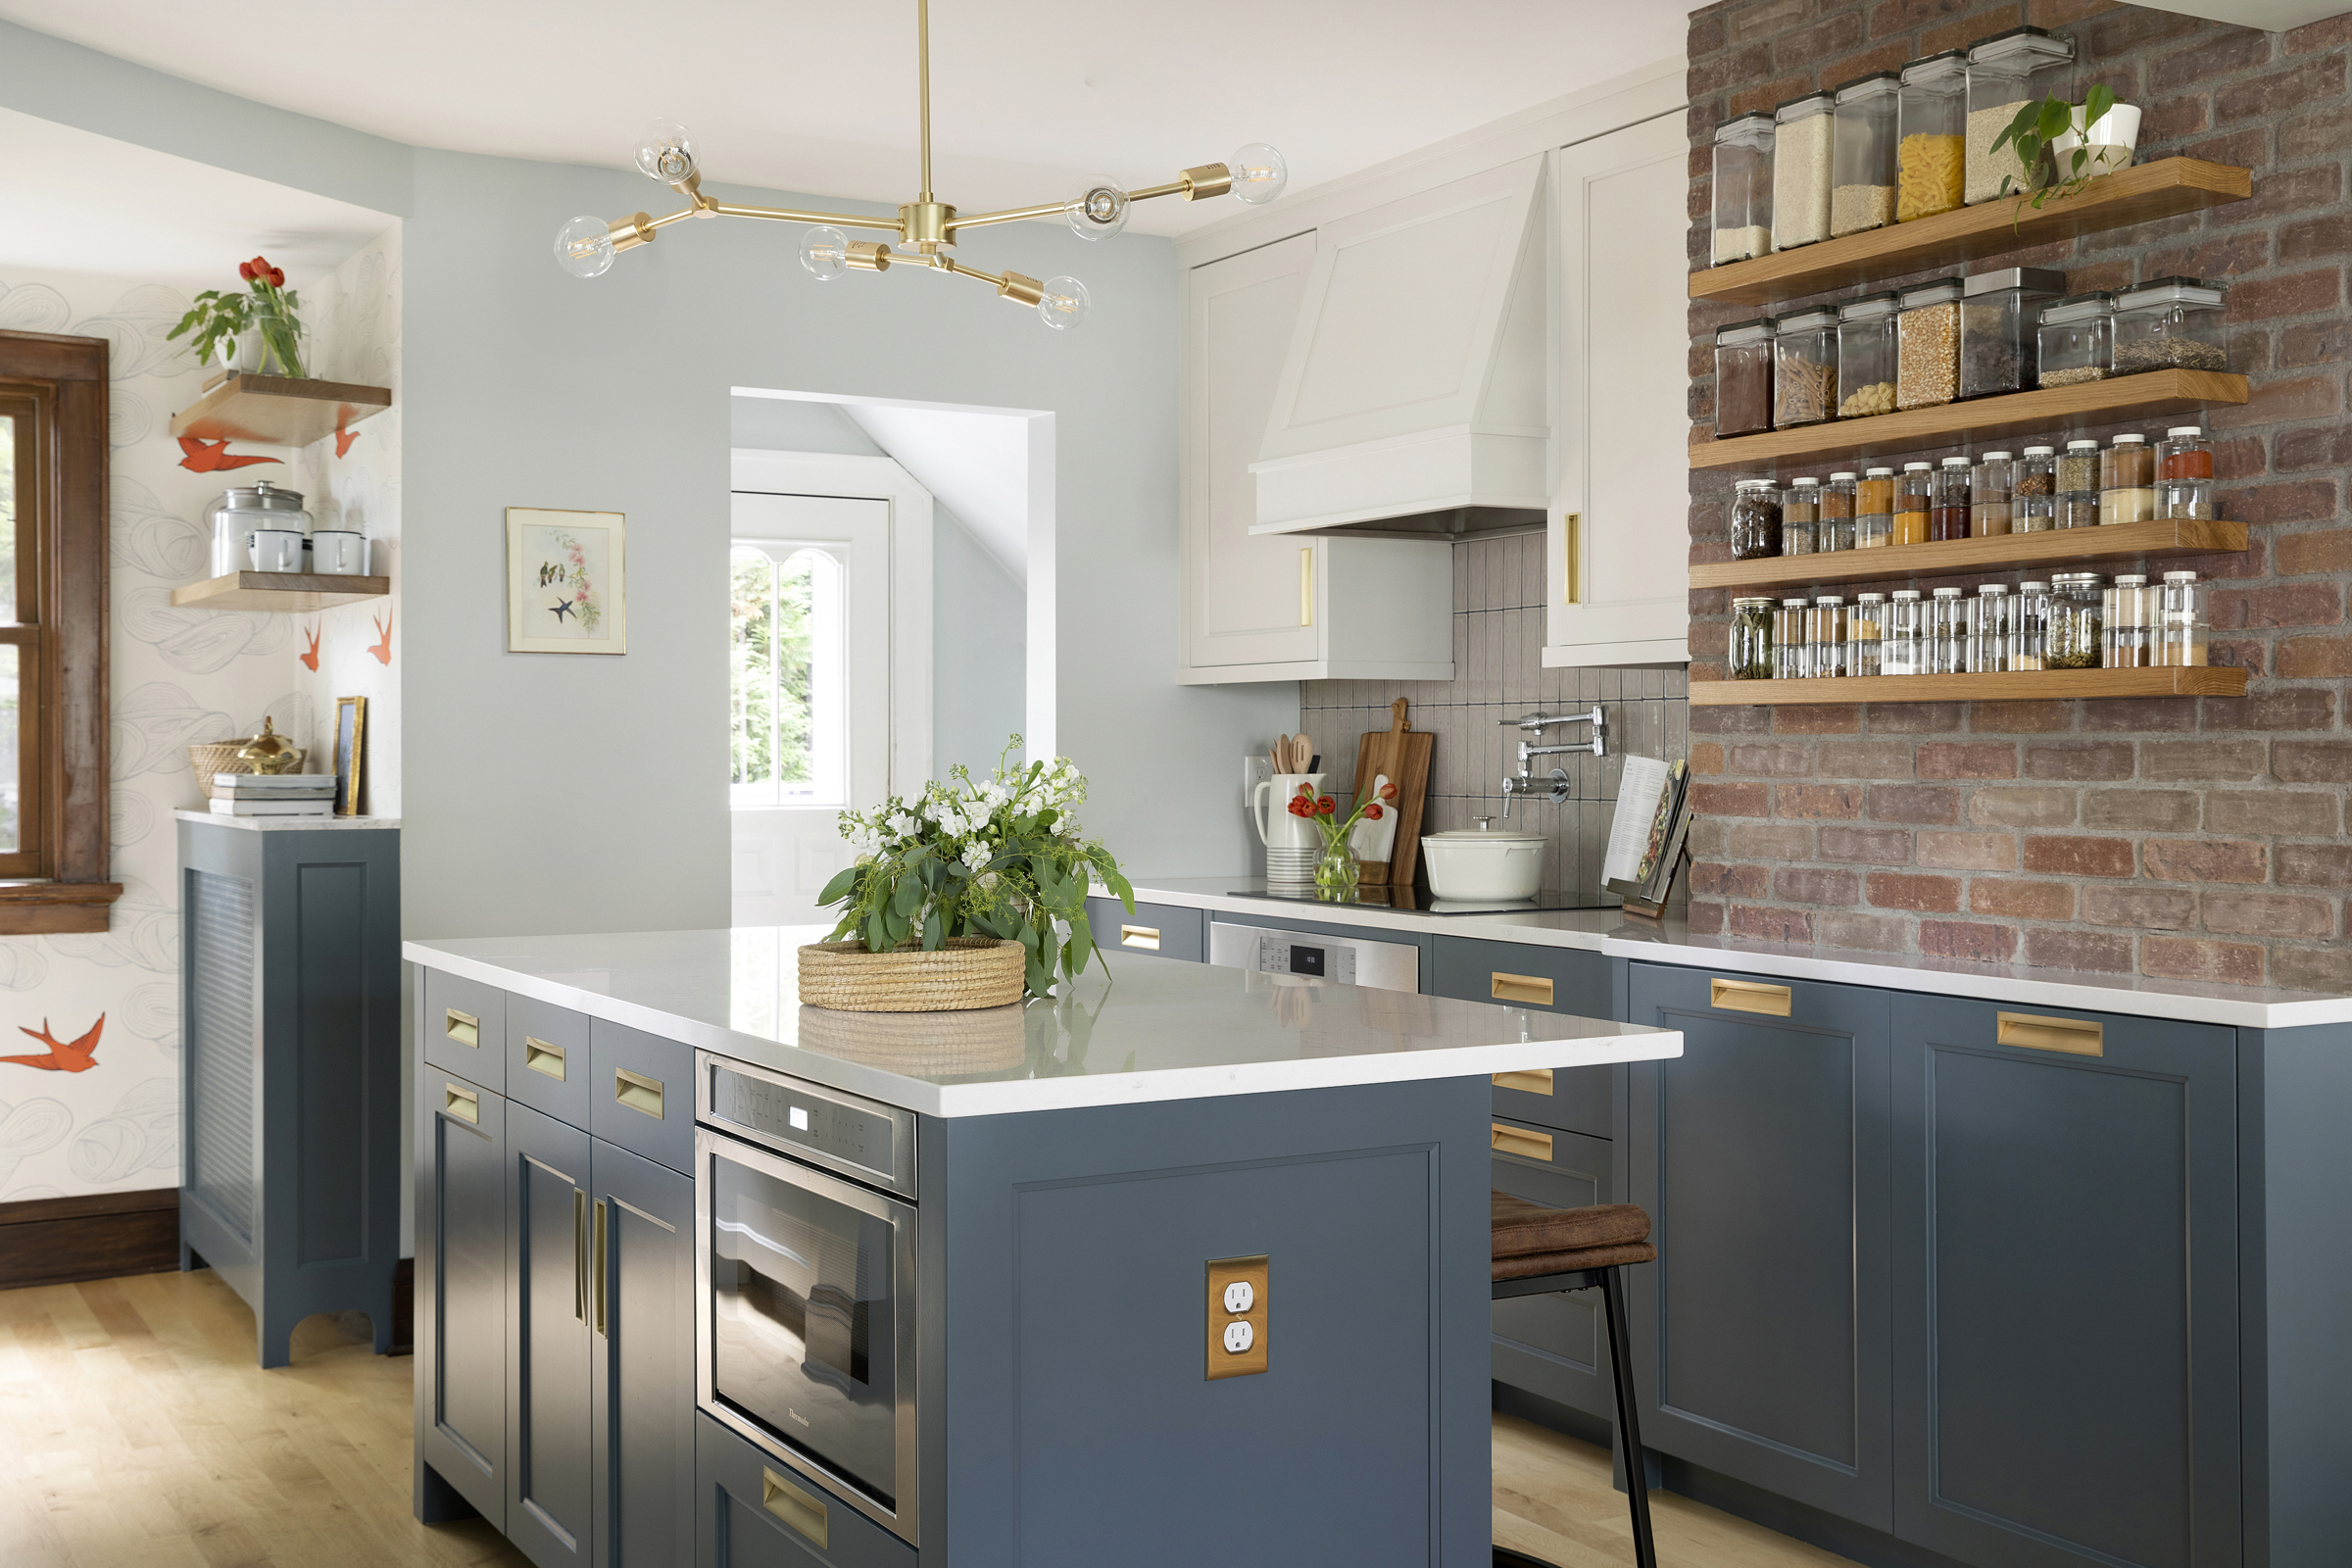 Blue and white custom kitchen with brass recessed cabinet hardware and lighting, orange bird wallpaper, island in small kitchen, brick chimney wall with wood shelves for spice display